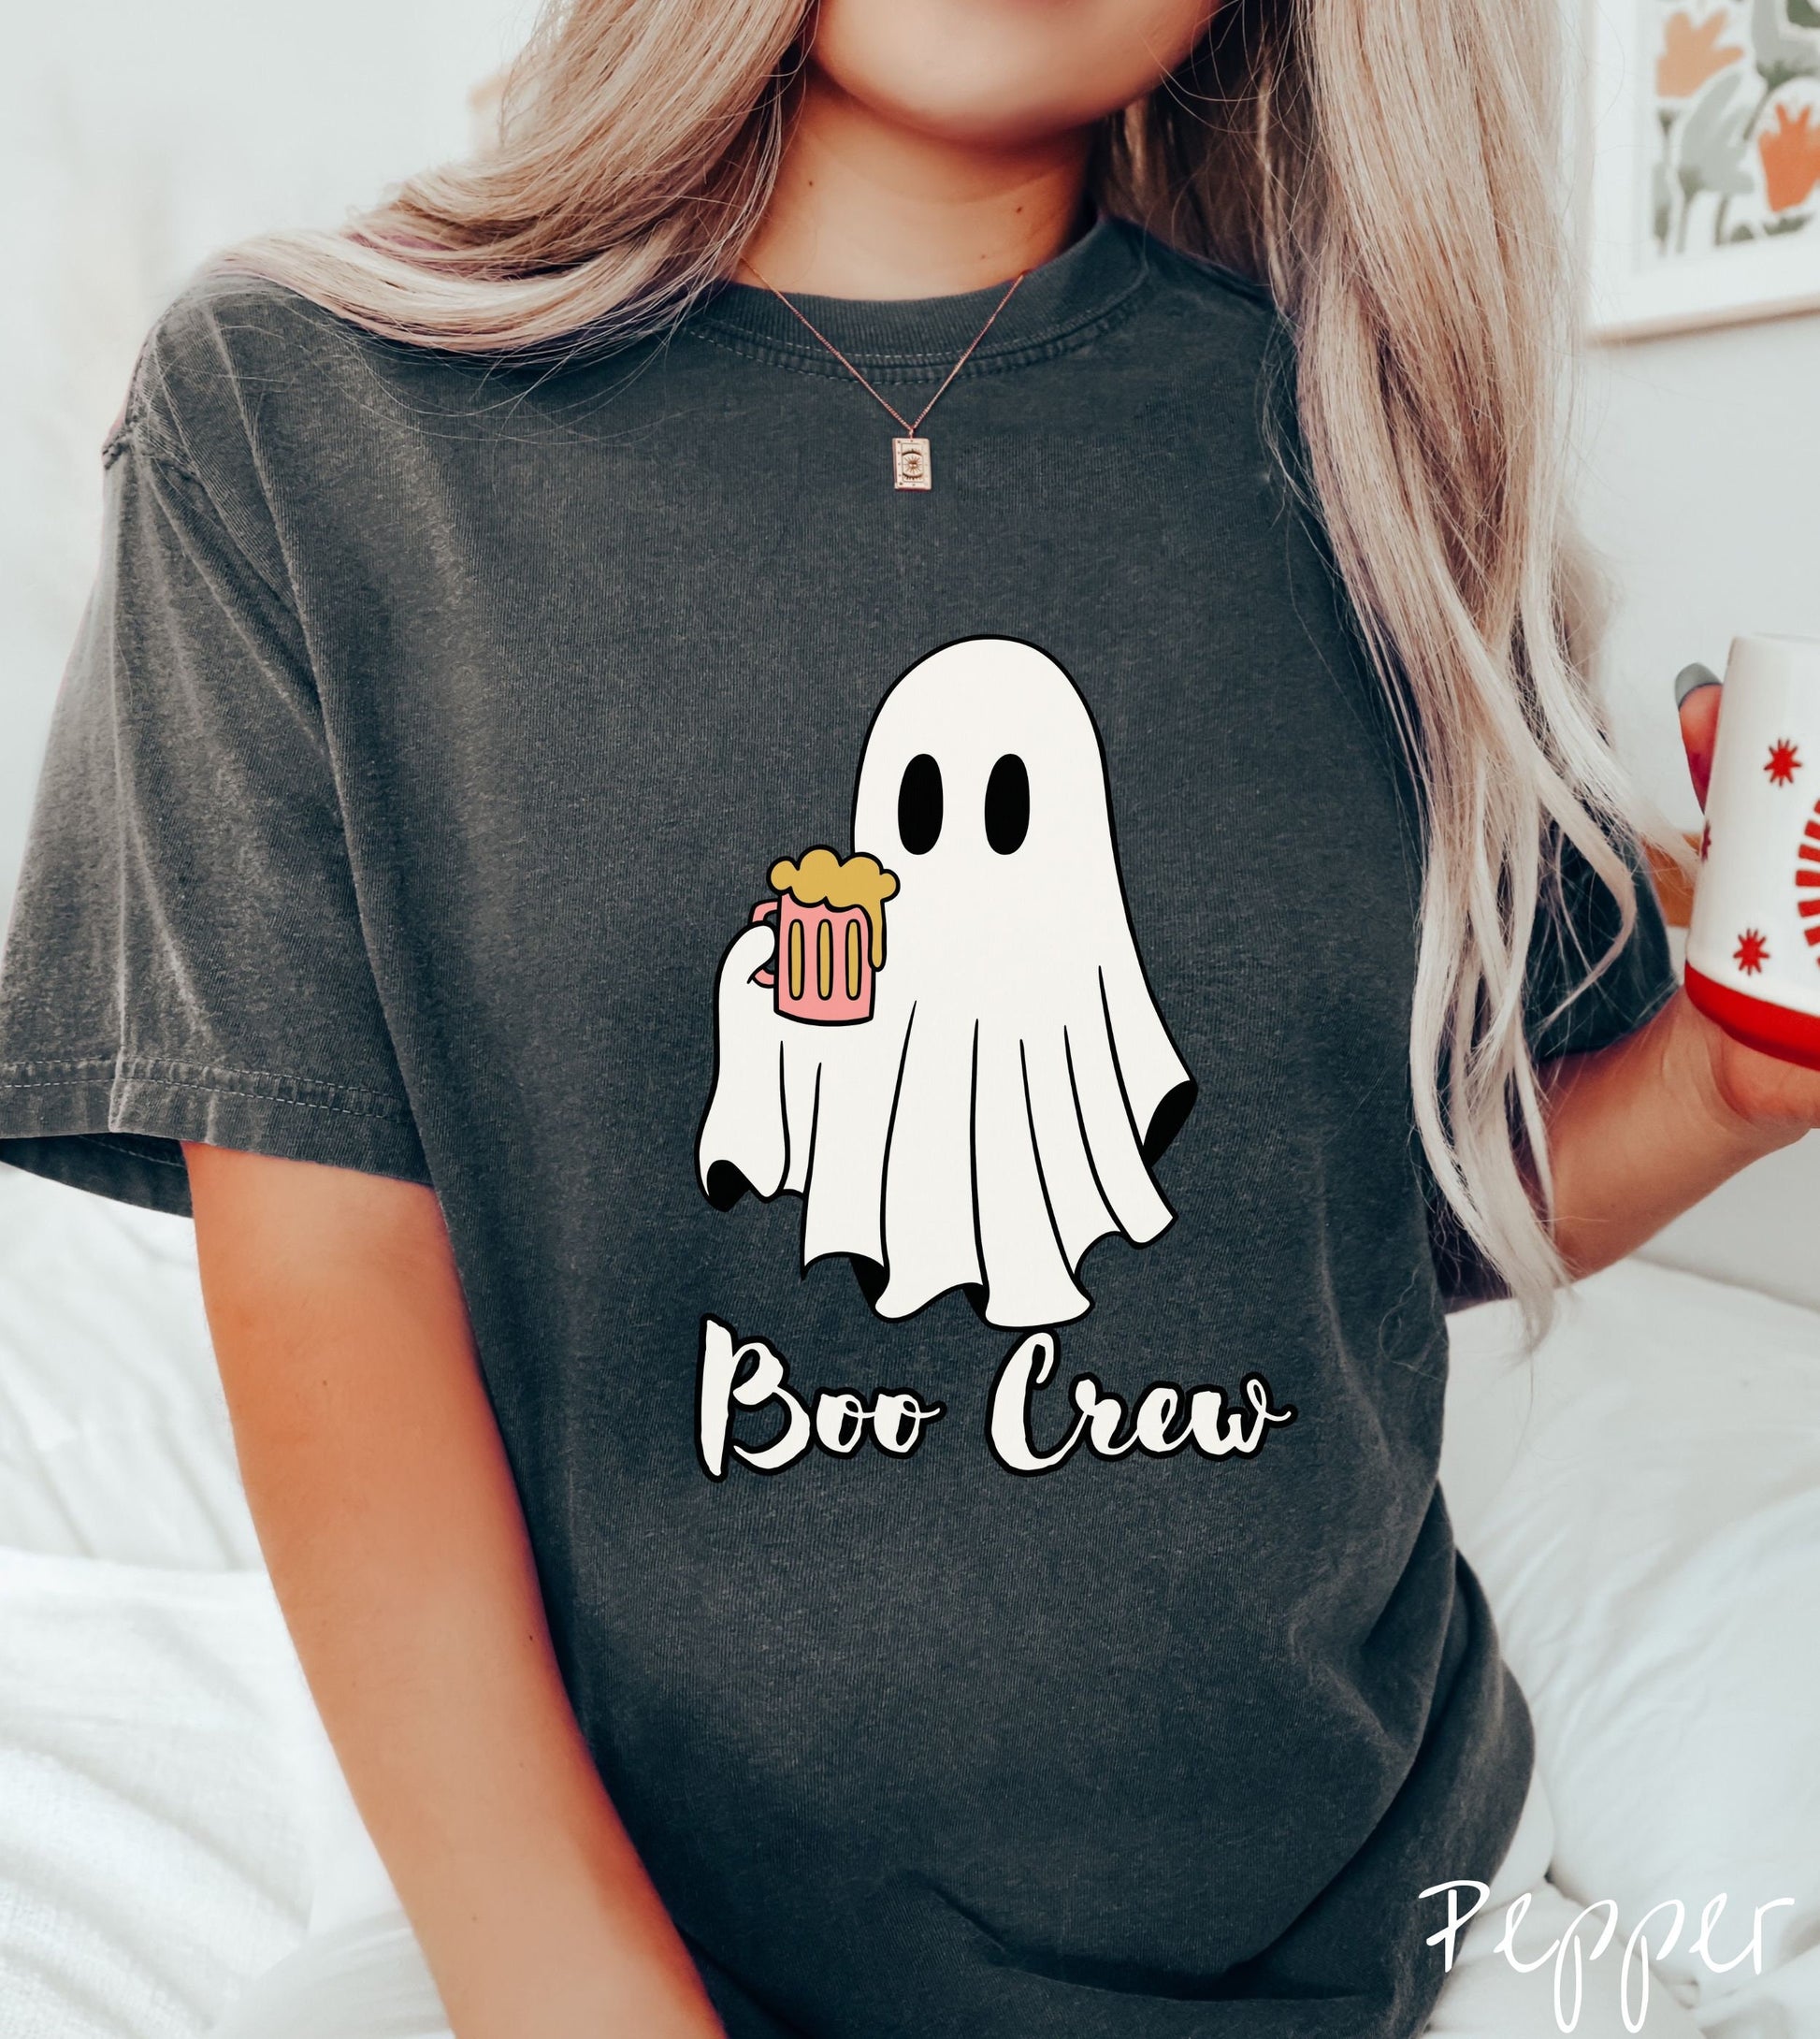 A woman wearing a cute pepper colored shirt with the text Boo Crew under a ghost figure holding a camera.